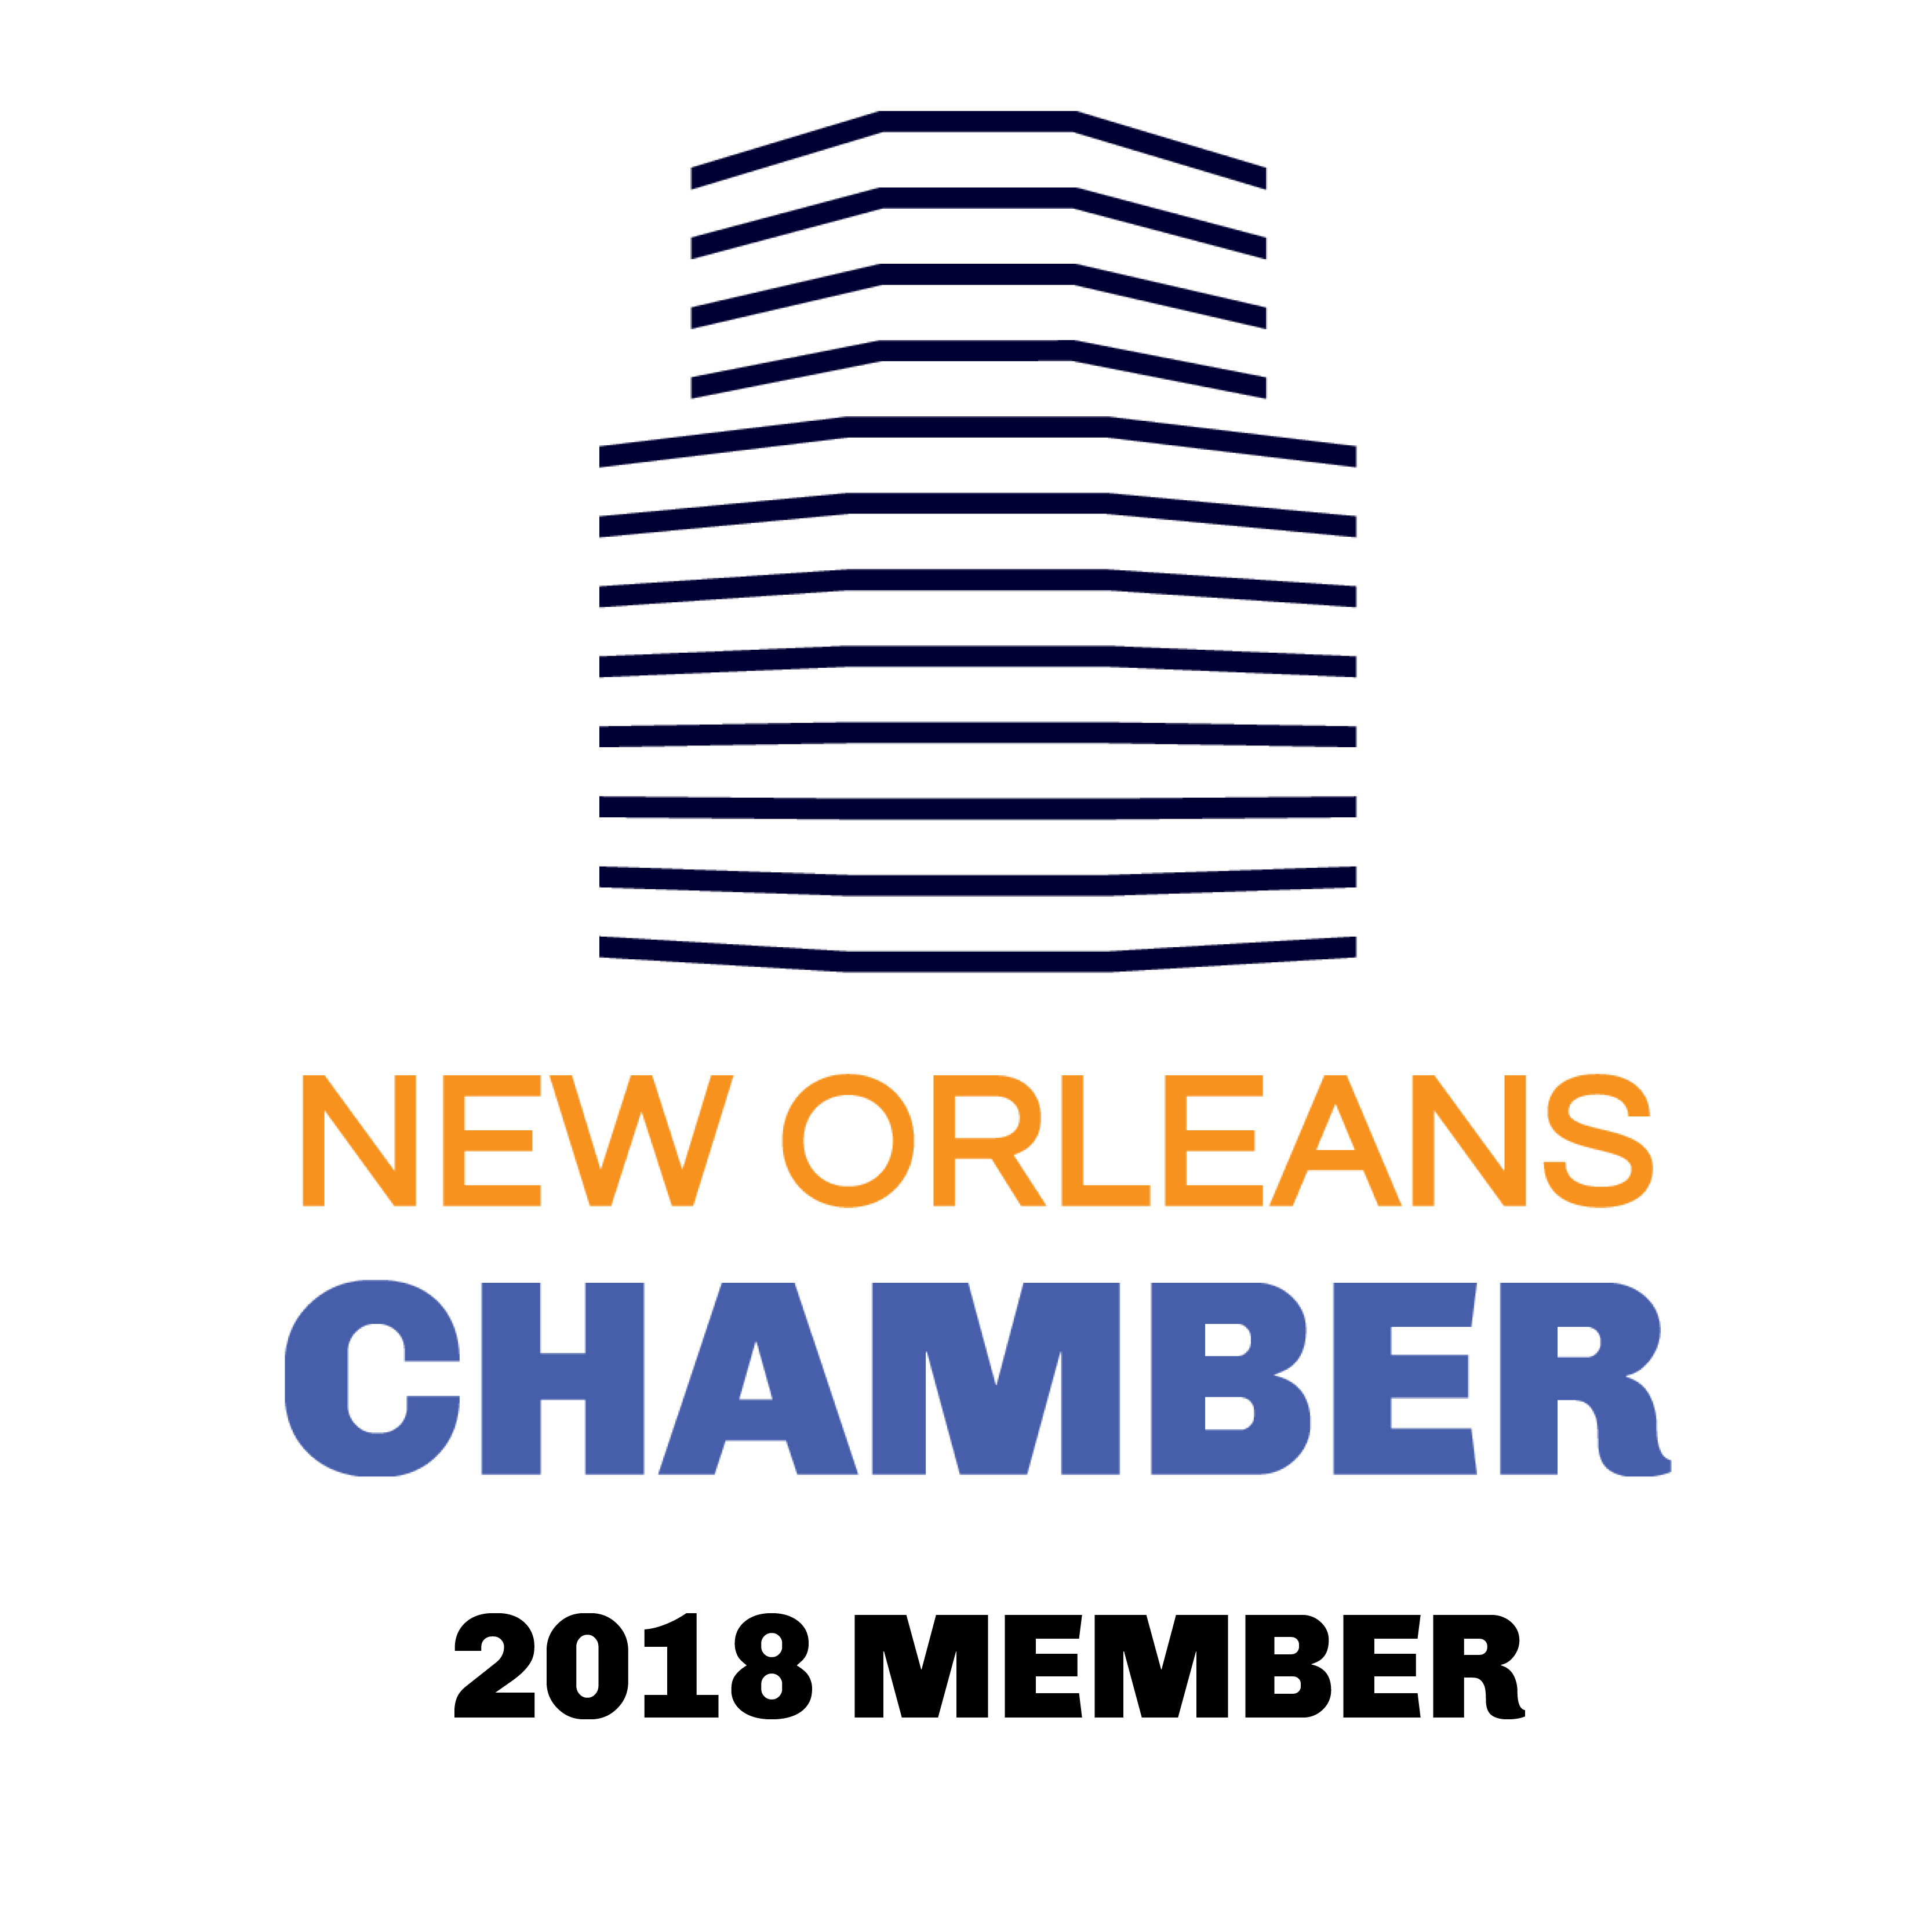 New Orleans Chamber of Commerce